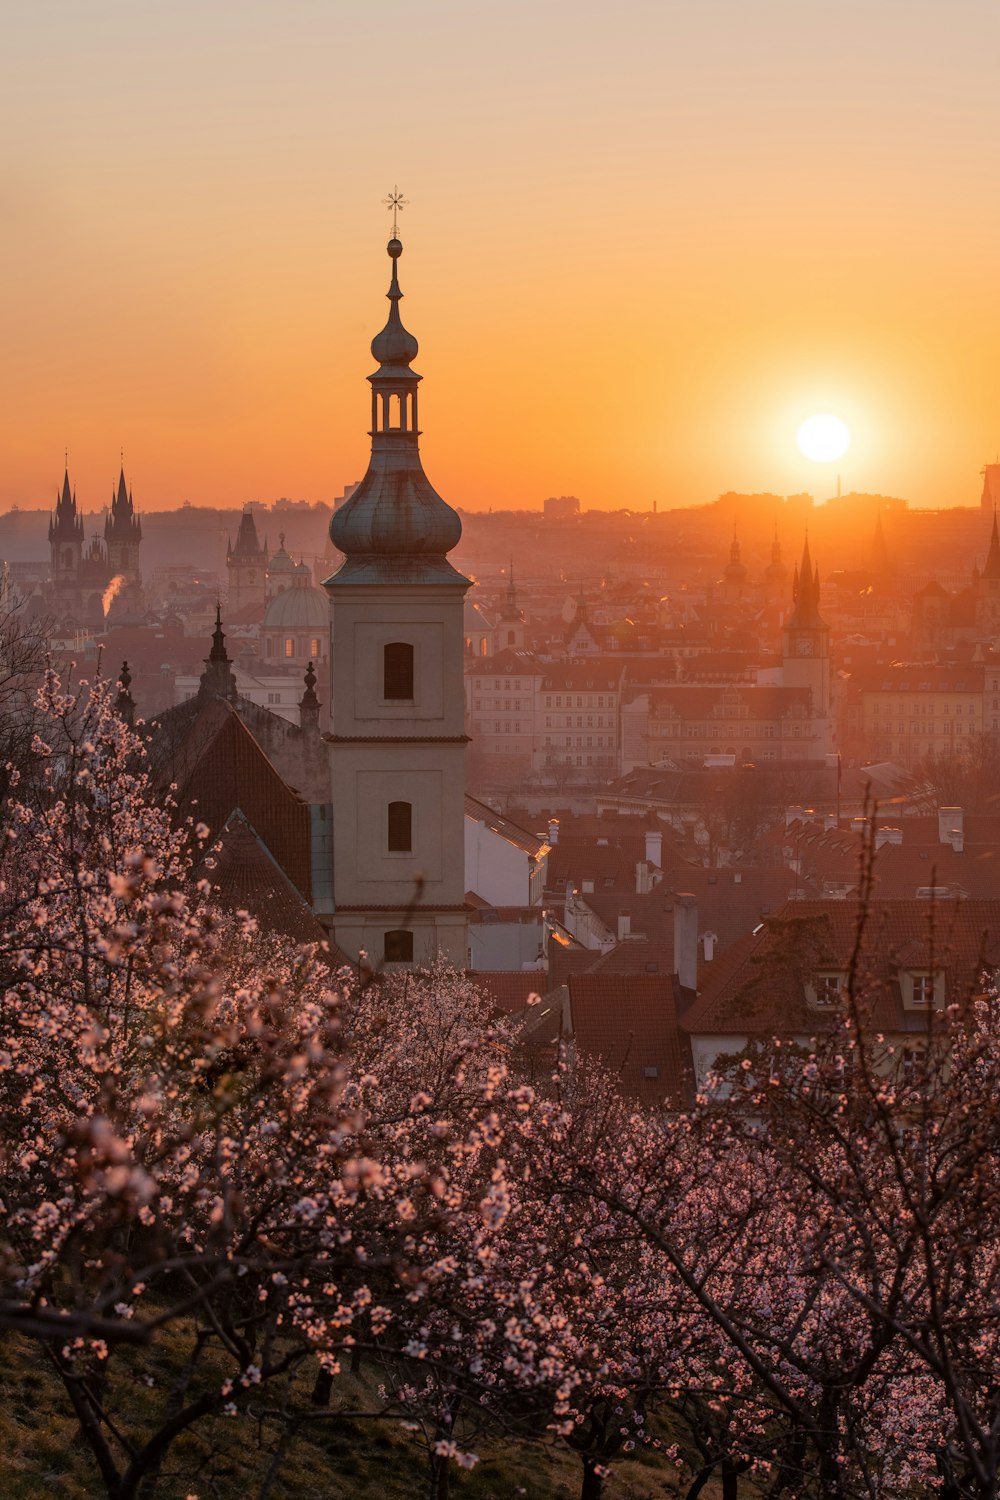 the sun is setting over the city of prague